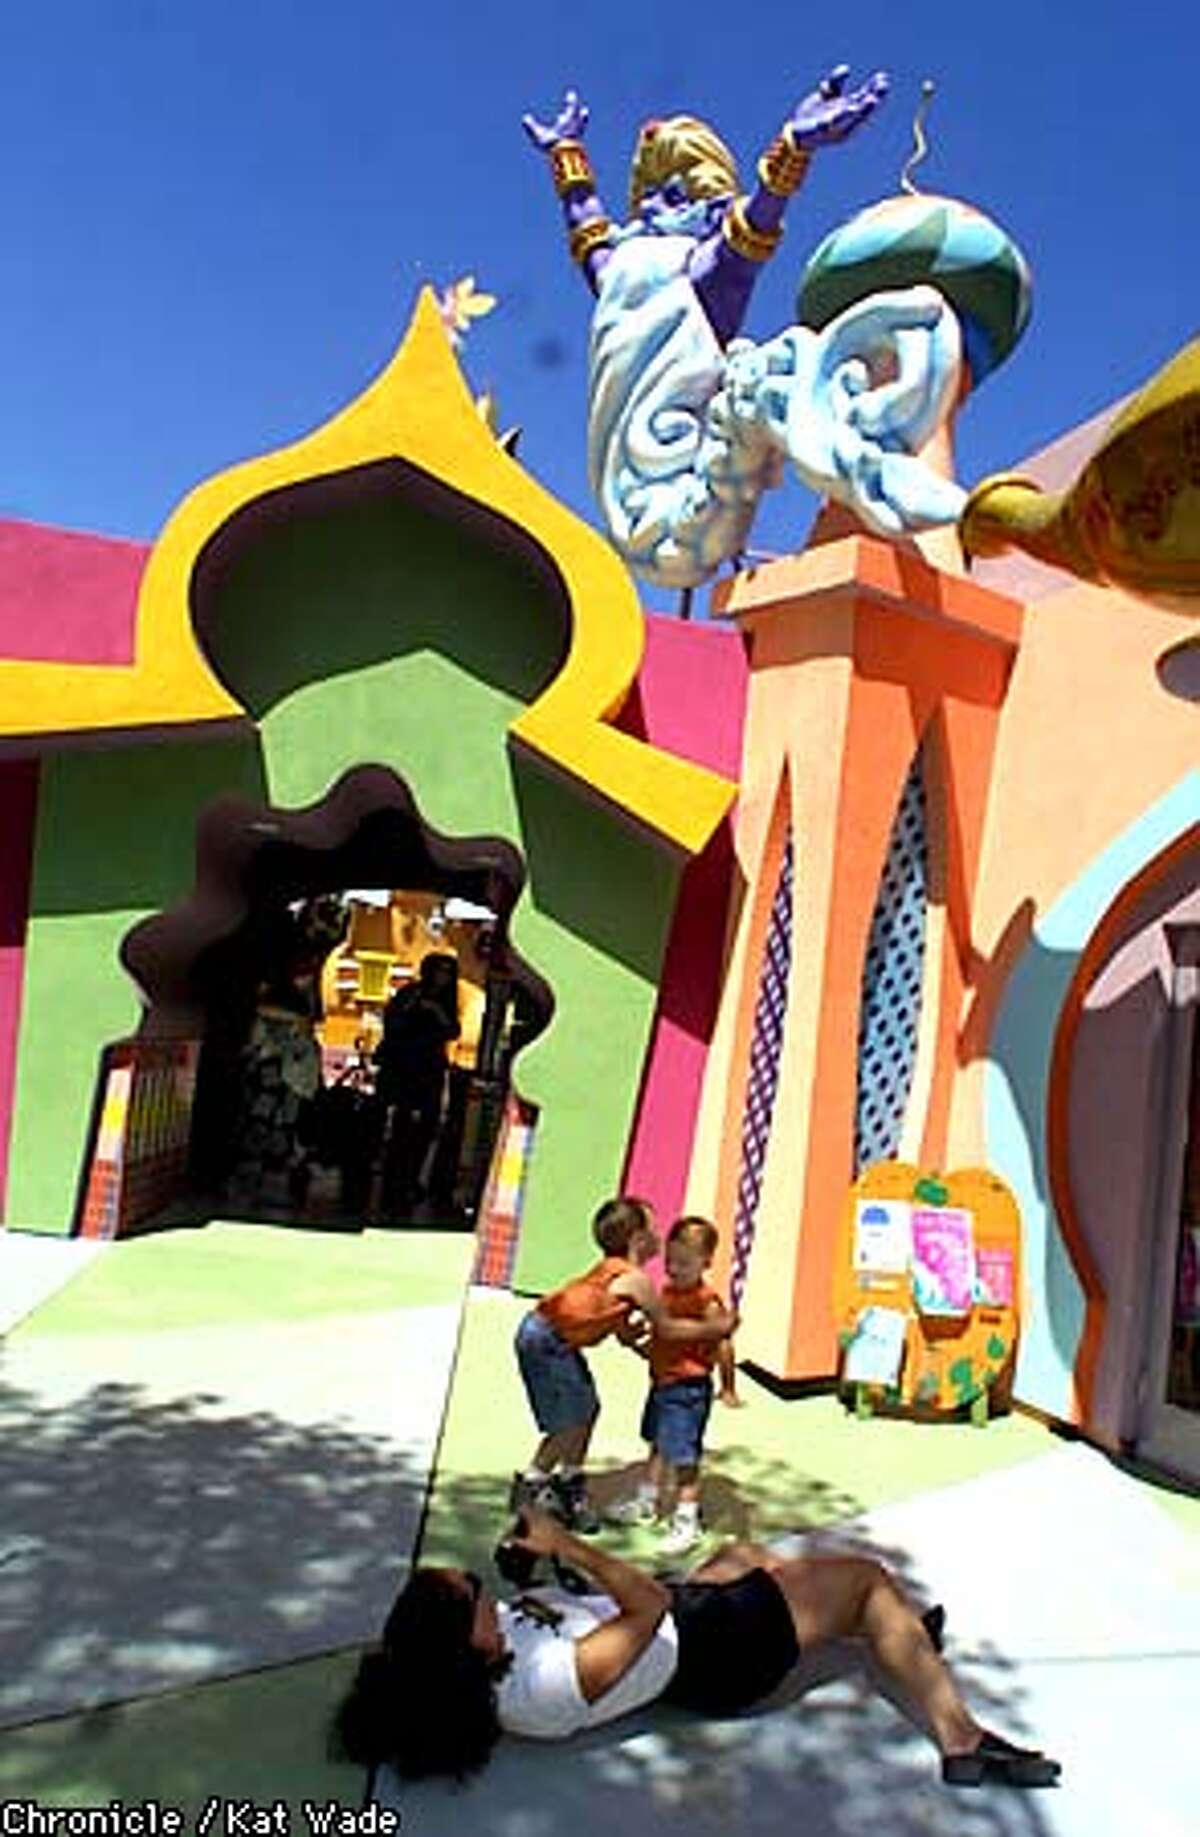 Brothers, (L to R) Kohl (CQ, 5, and Craig, 3, Thorlakson, of Trabuco Canyon California pose for a photo fo their mother Andrea at the new Fairyland plaza featureing Aladin and the genie. SAN FRANCISCO CHRONICLE PHOTO BY KAT WADE